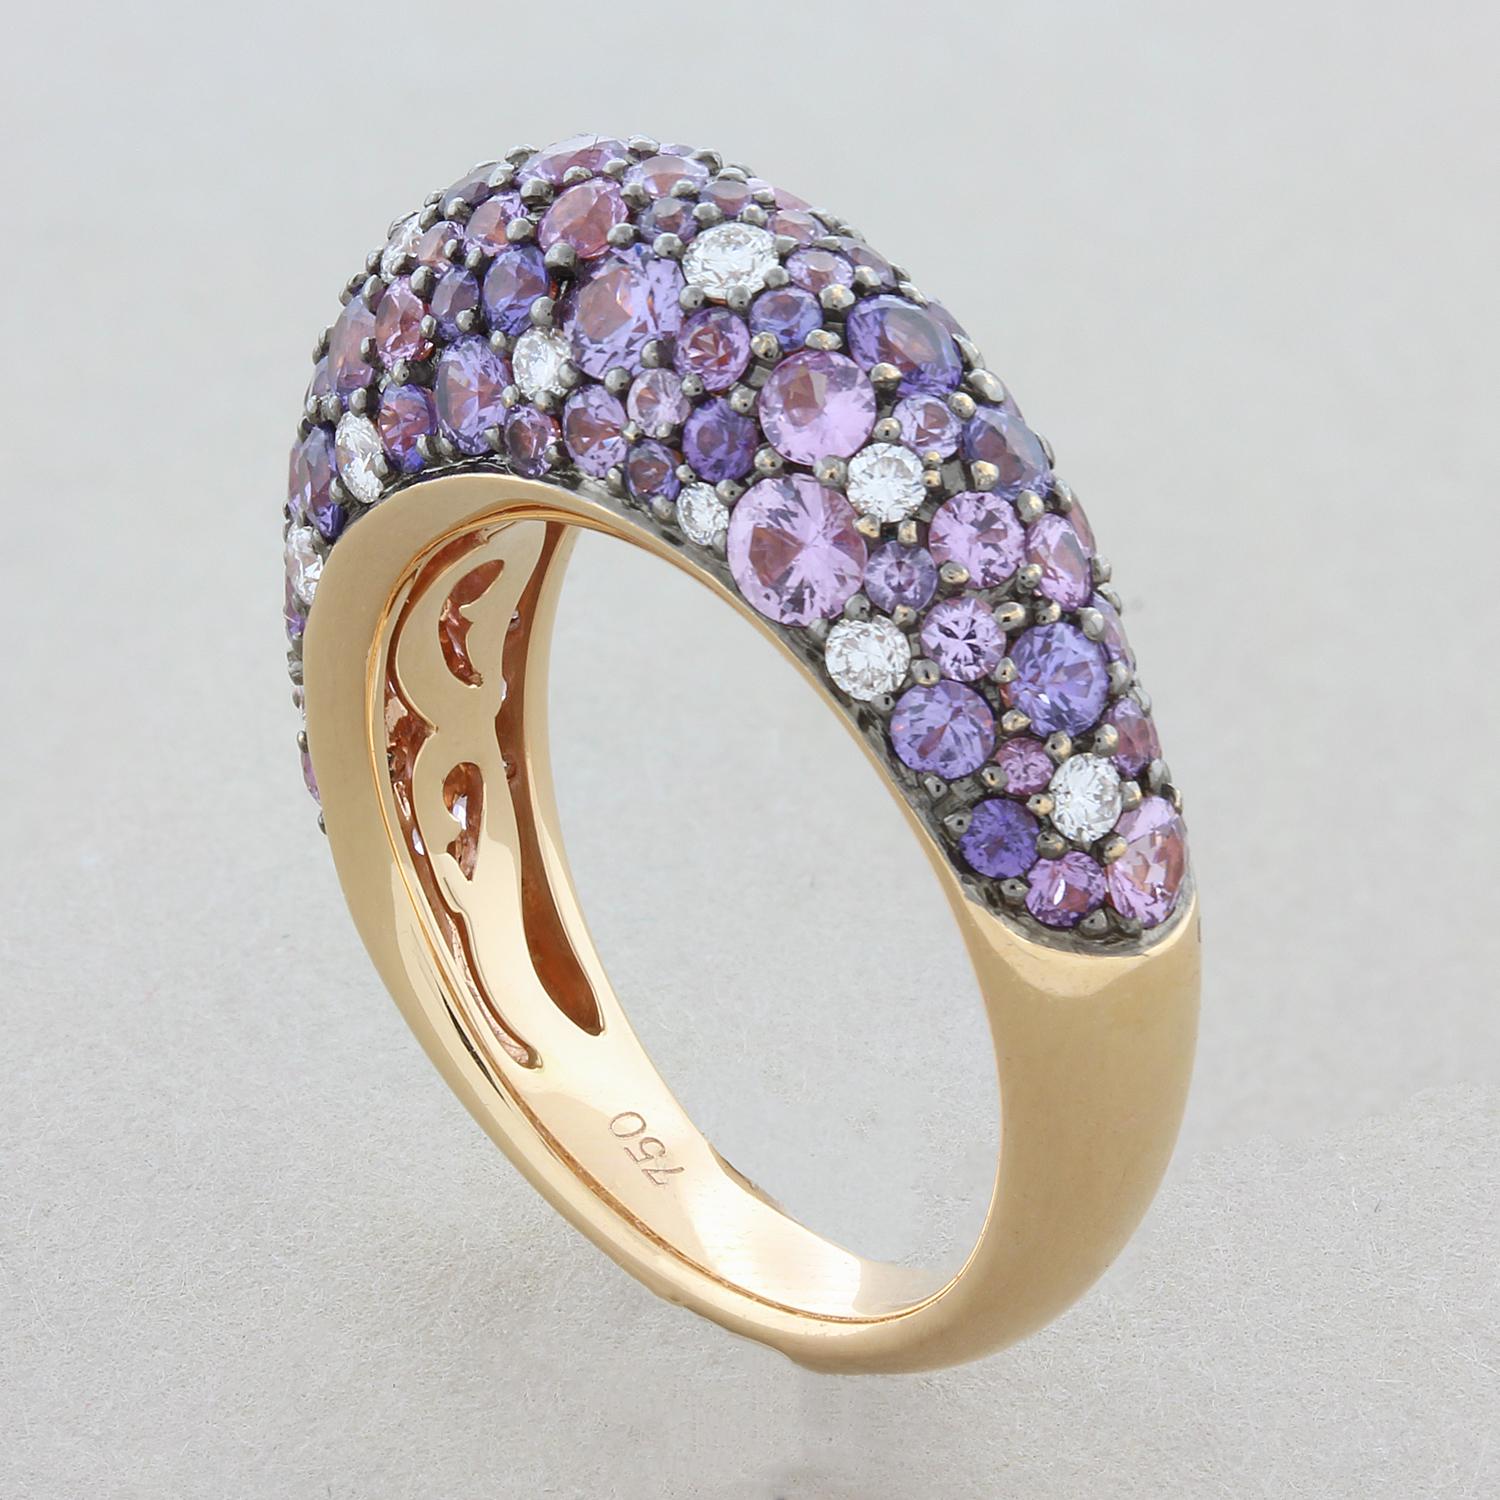 This luscious dome ring features 2.85 carats purple sapphire in different tones from deeper to light colors. They are accented by 0.33 carats of round brilliant cut diamonds. The pave set round cut stones are set in 18K rose gold.

Ring Size 6.5